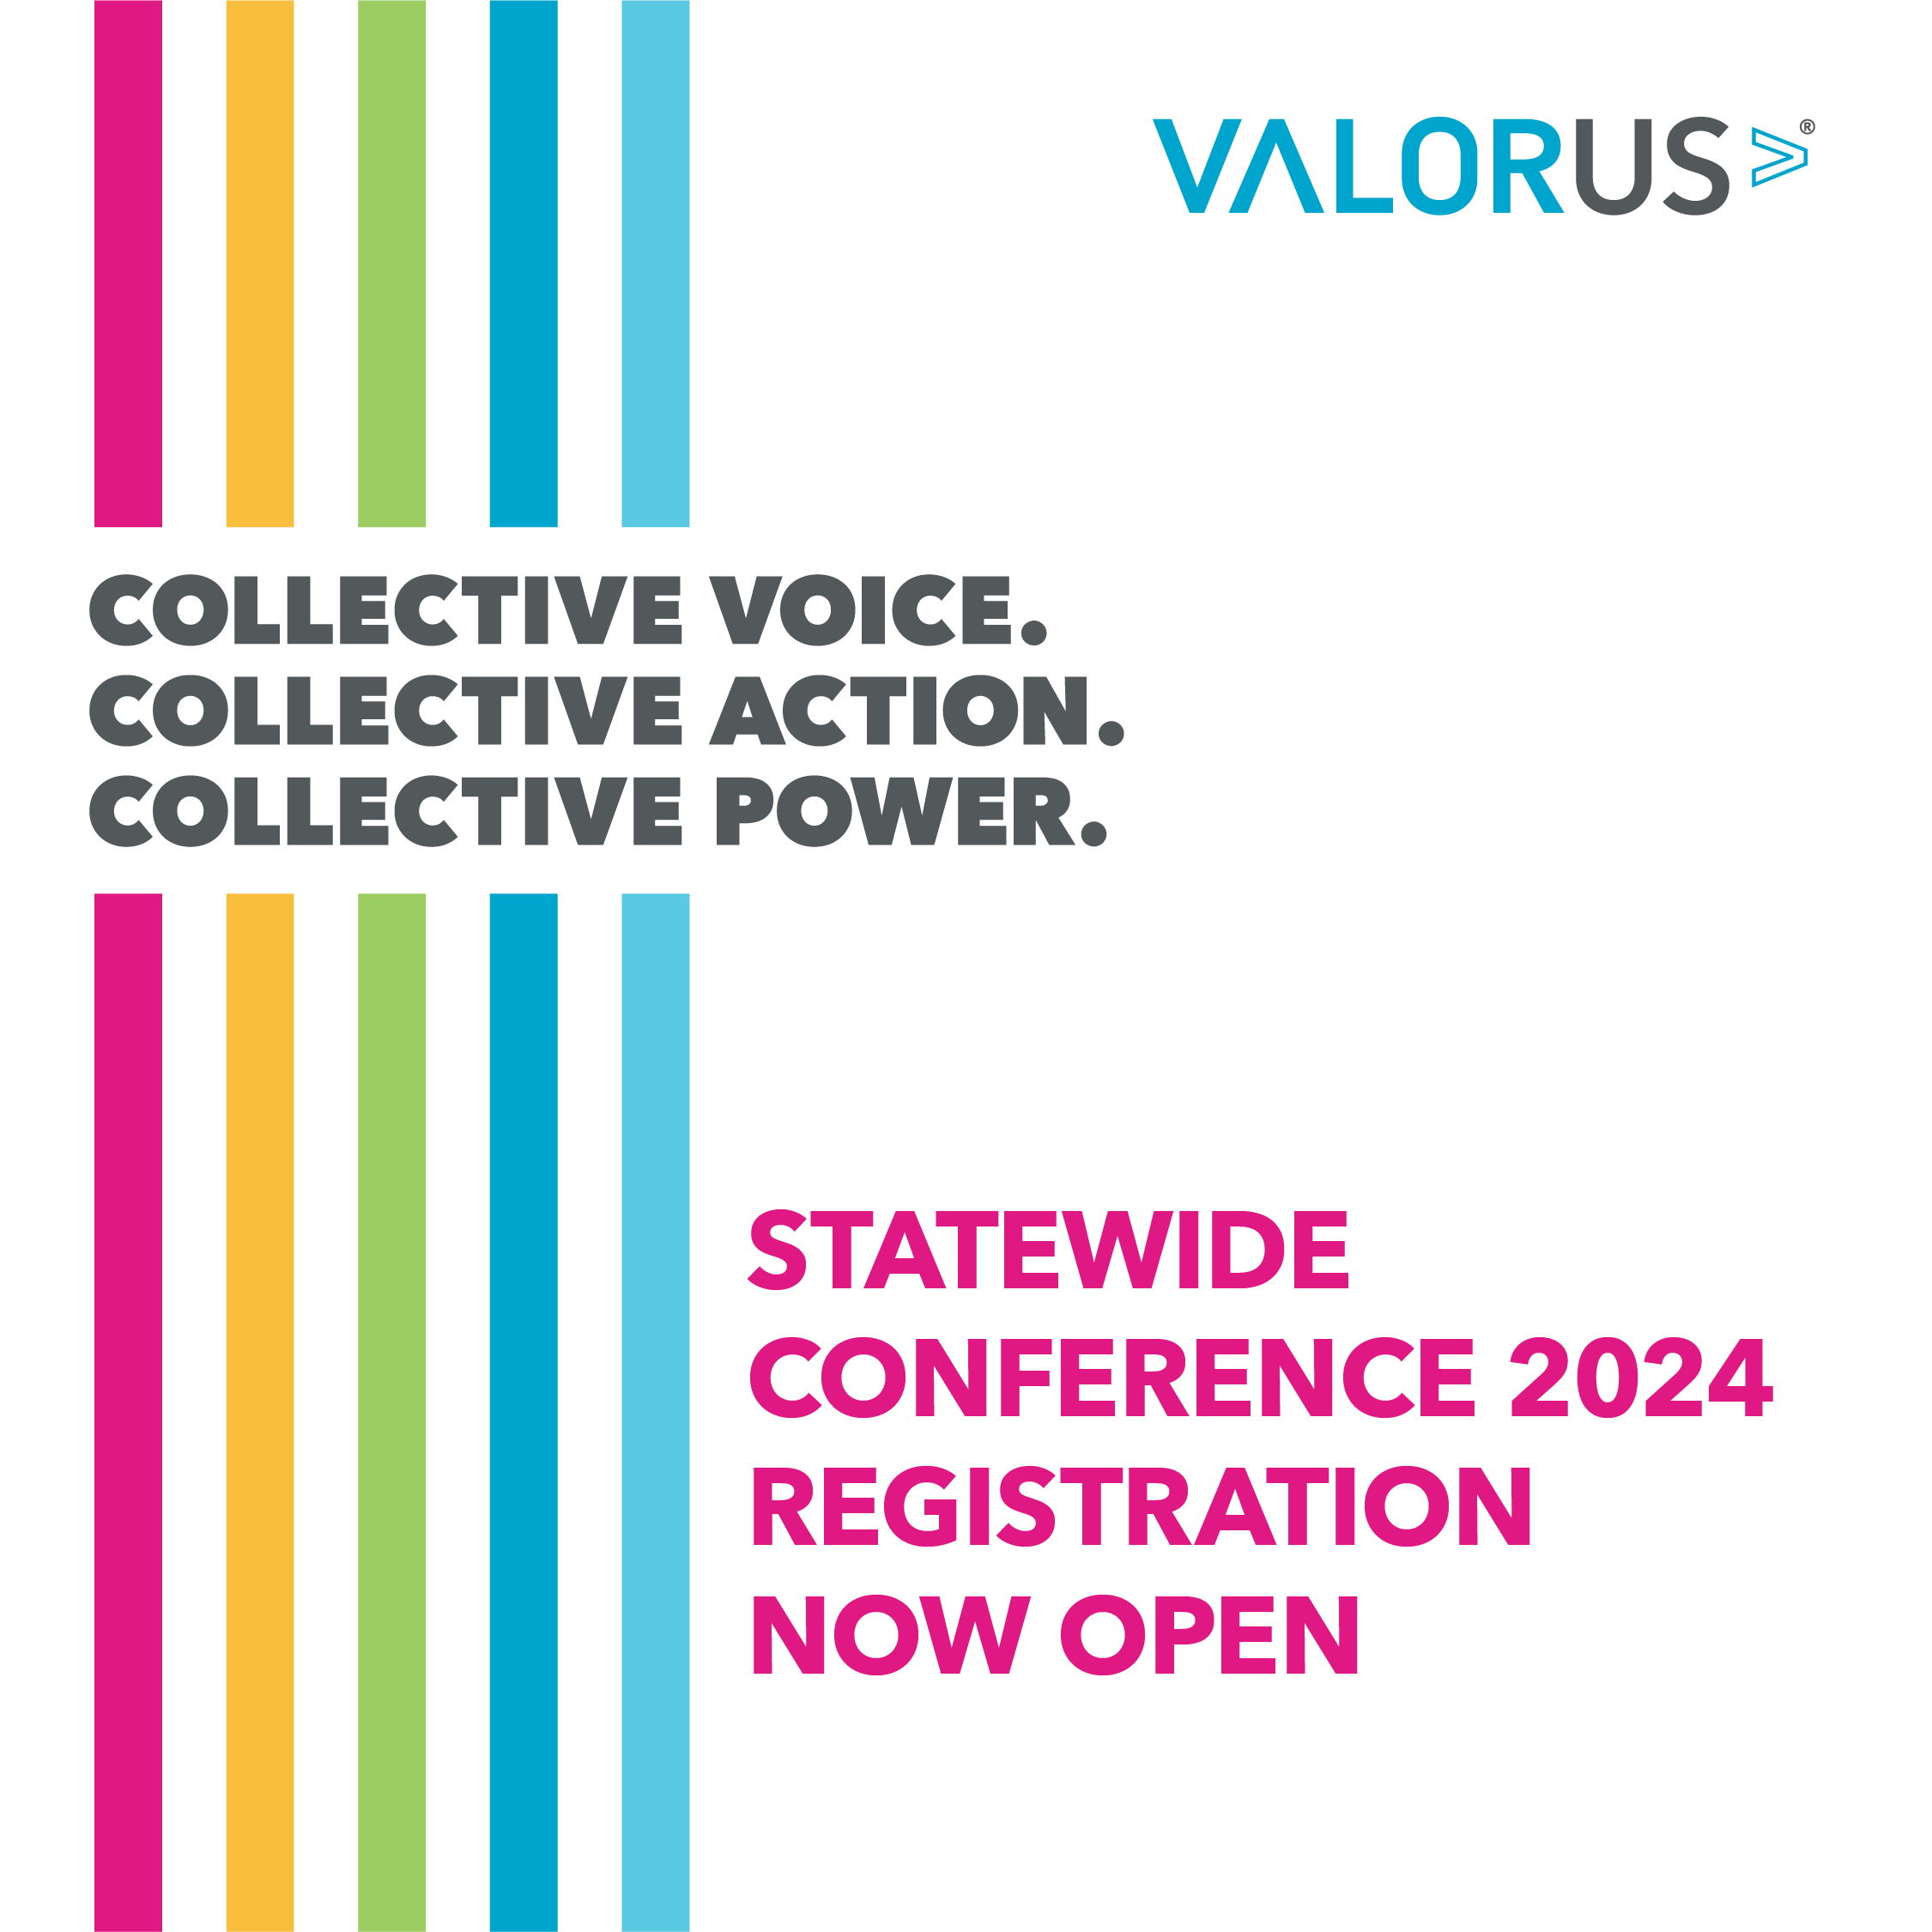 White background with multicolored stripes down the left side. Text intersecting the stripes states, "Collective Voice. Collective Action. Collective Power." To the bottom right of the stripes, text states, "Statewide Conference 2024 Registration Now Open." VALOR logo top right.